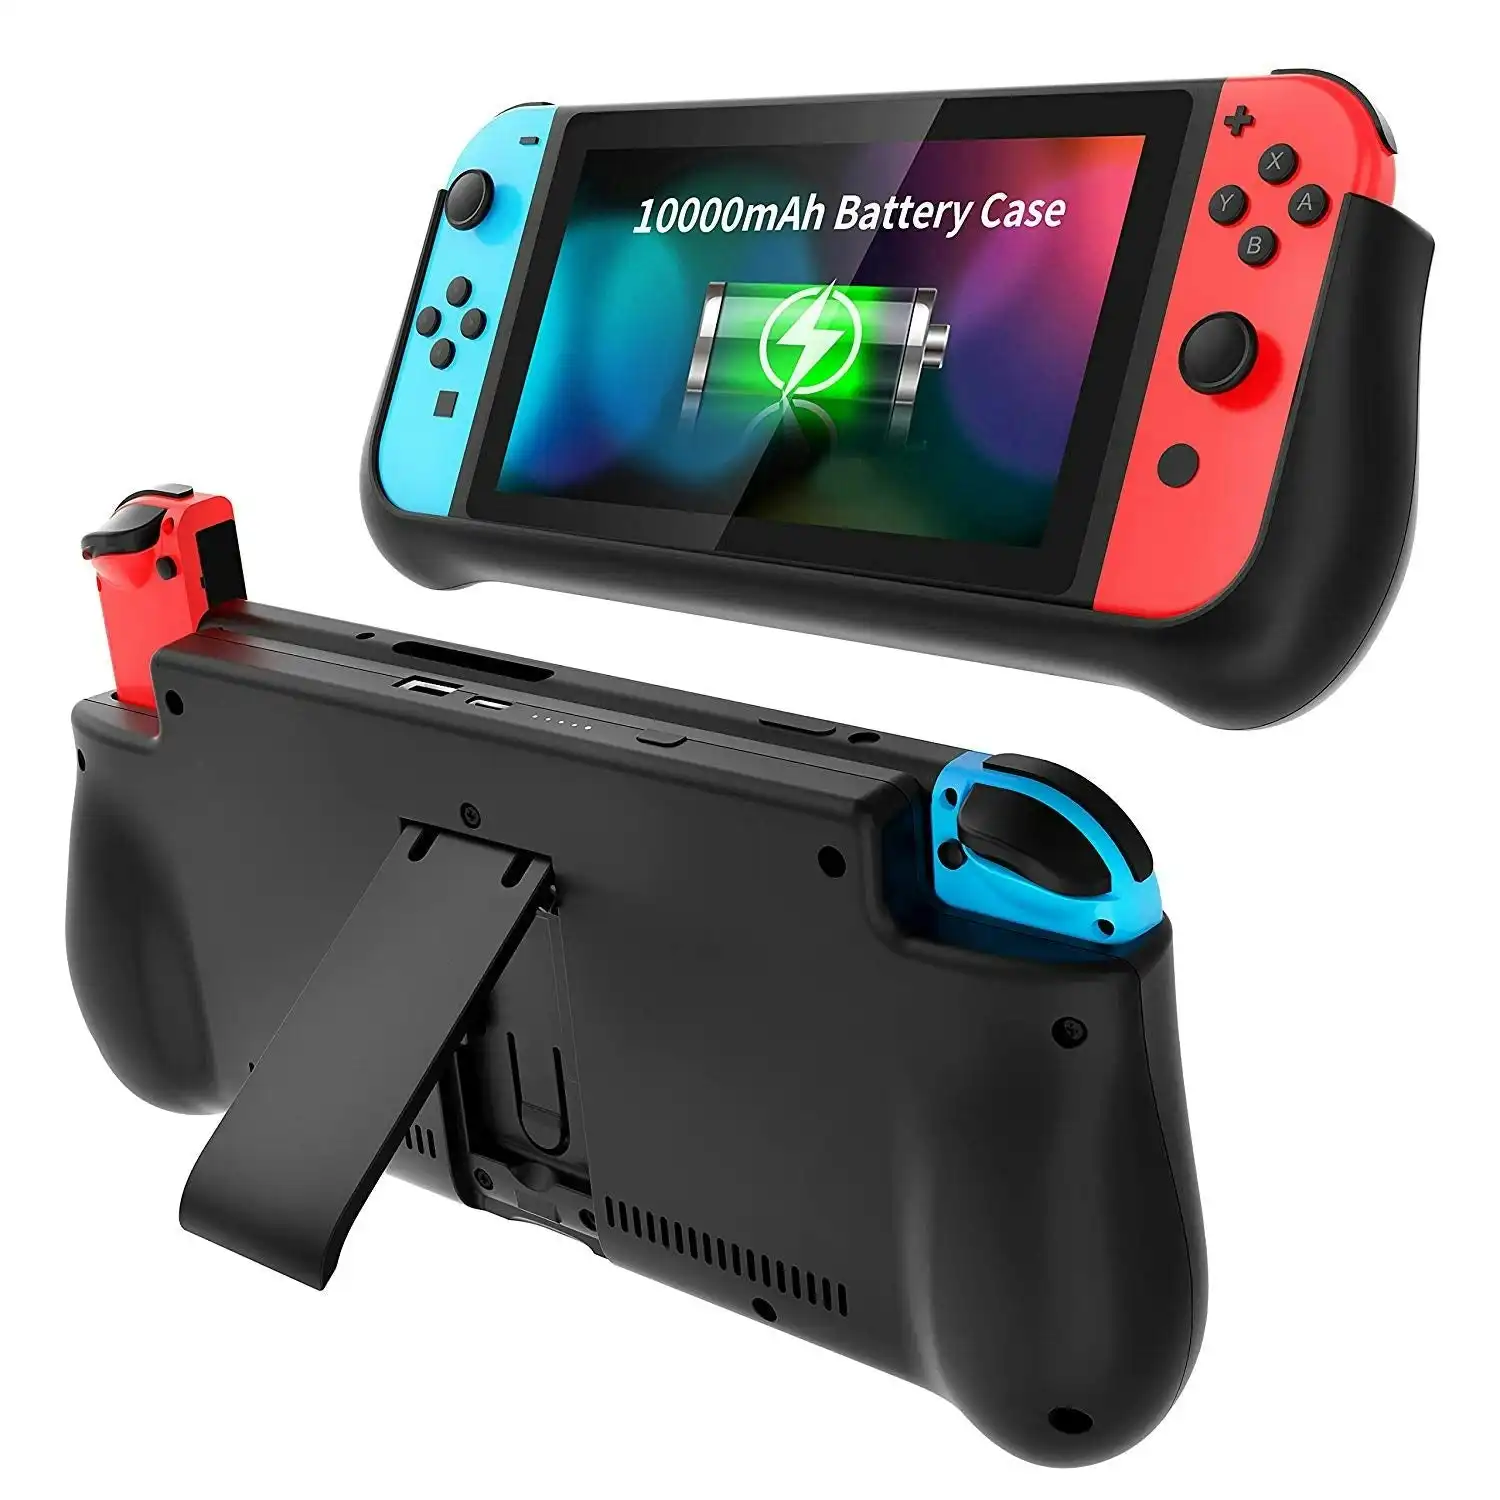 Battery Case and Power Bank Compatible With Nintendo Switch - 10000mAh (Black)